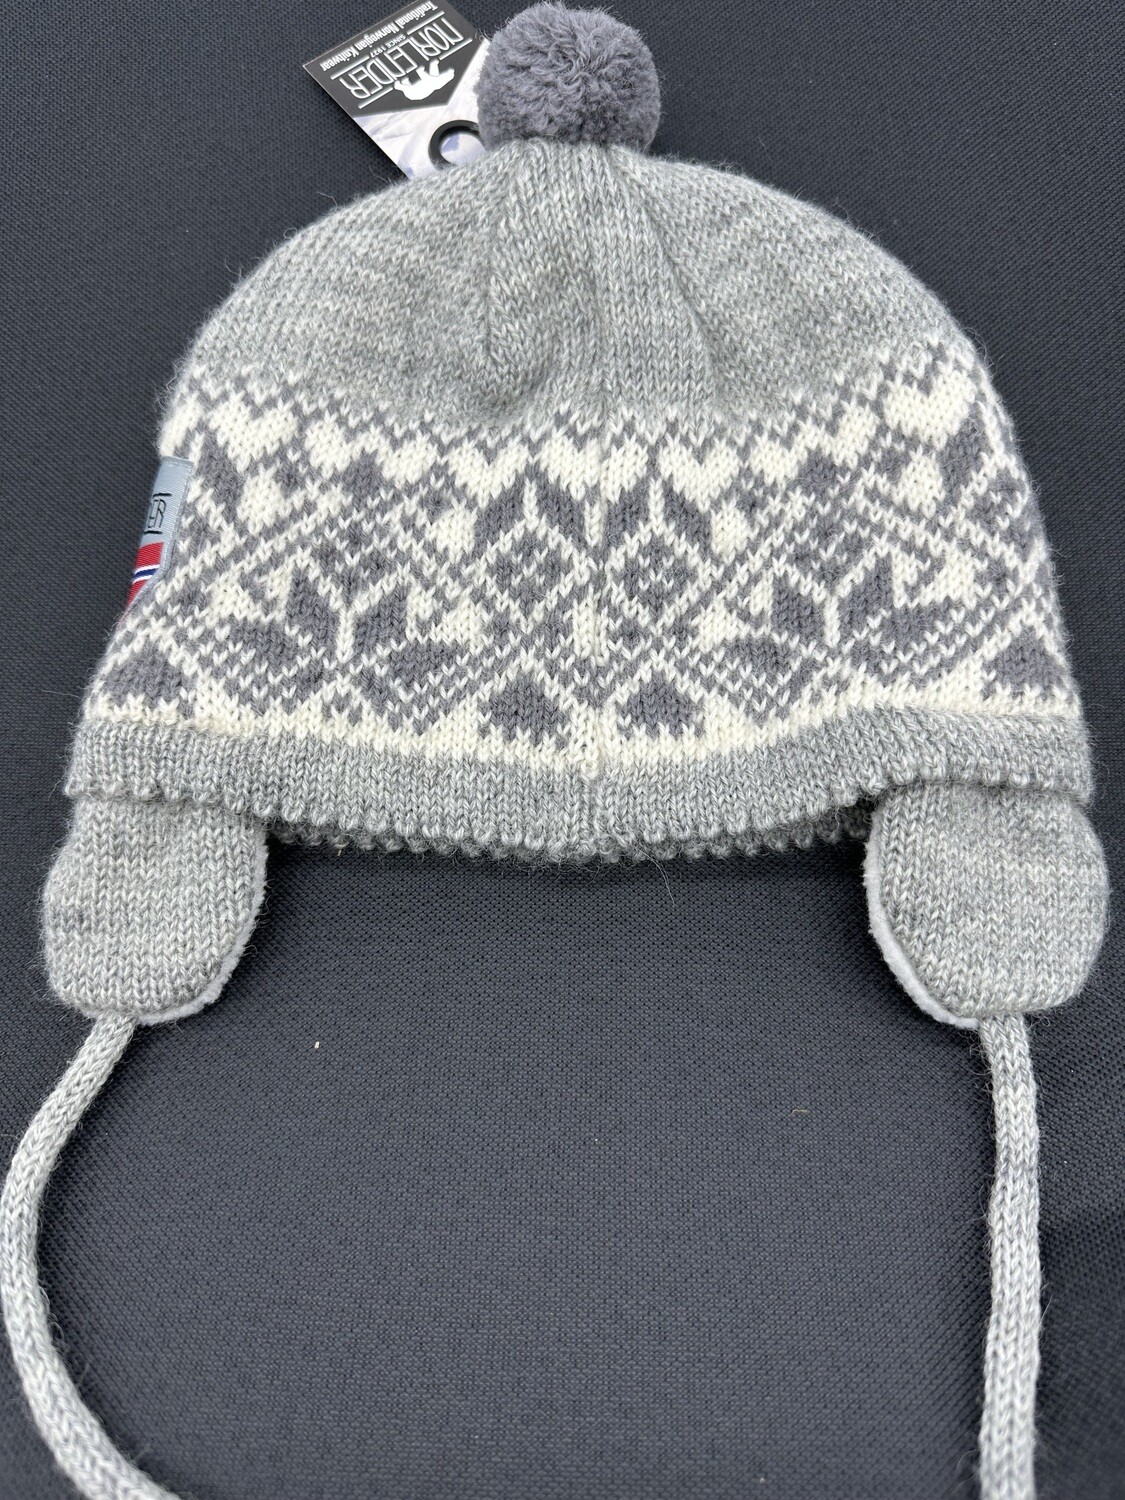 Hat, Child Fleece Lined Grey Size 3-4 Yrs